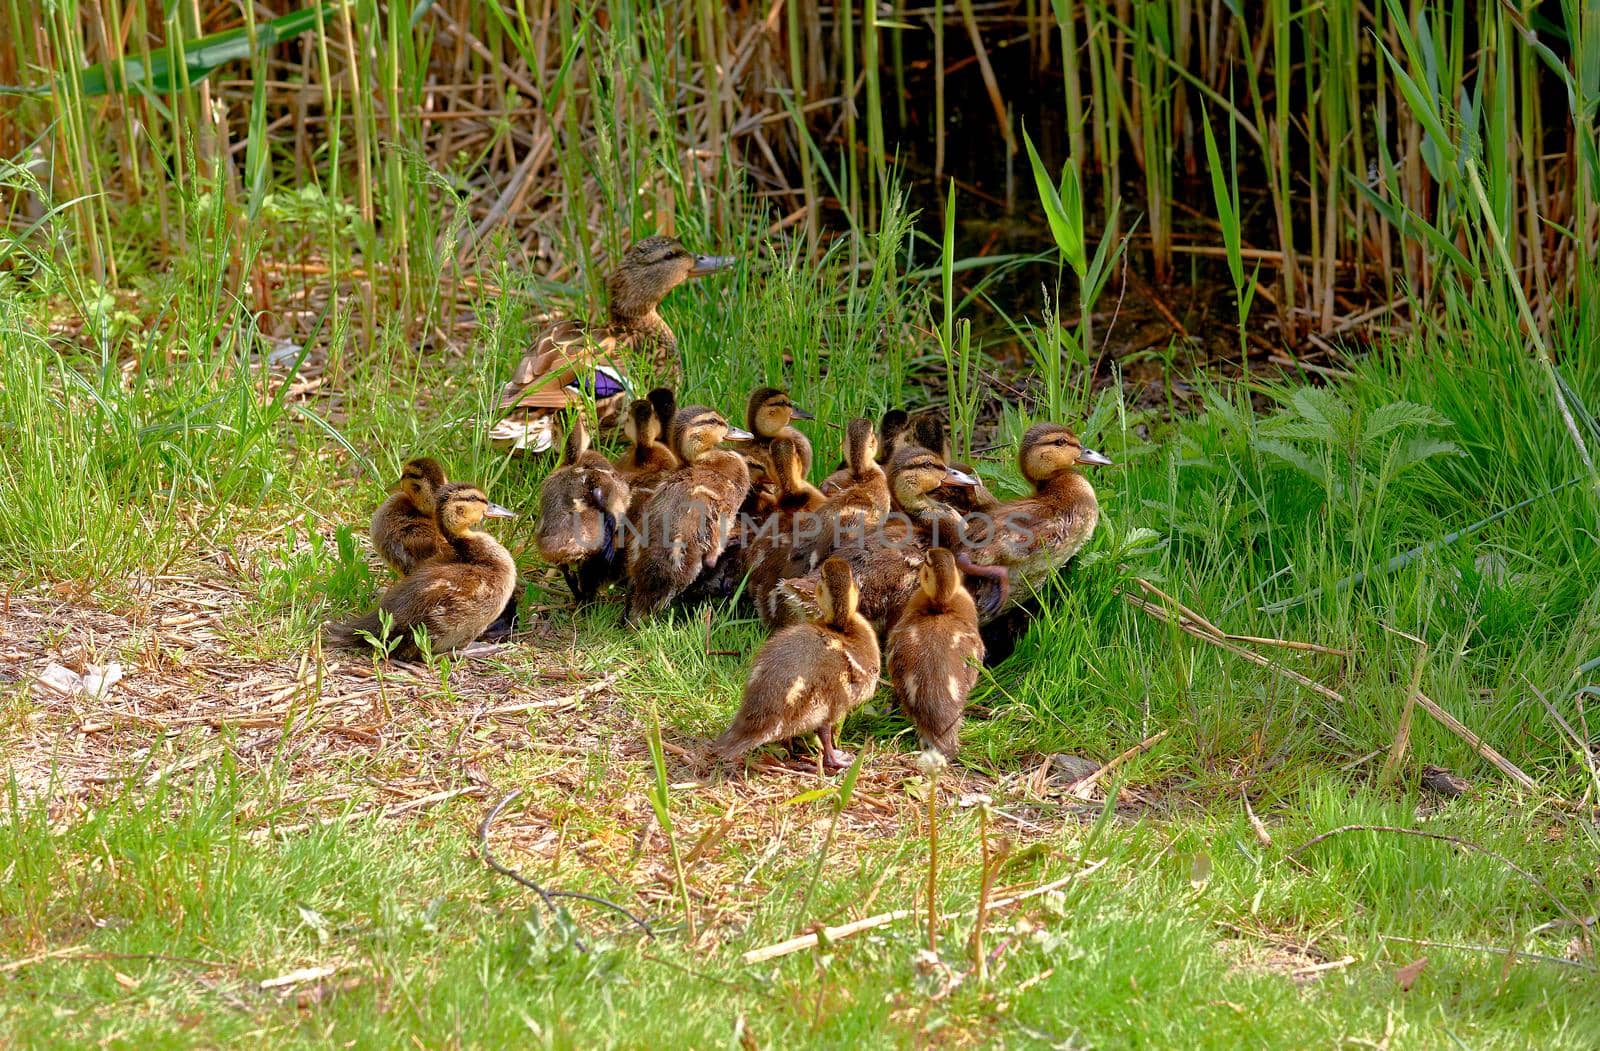 Mom wild brown duck leads her baby ducklings to the water in the reeds by jovani68